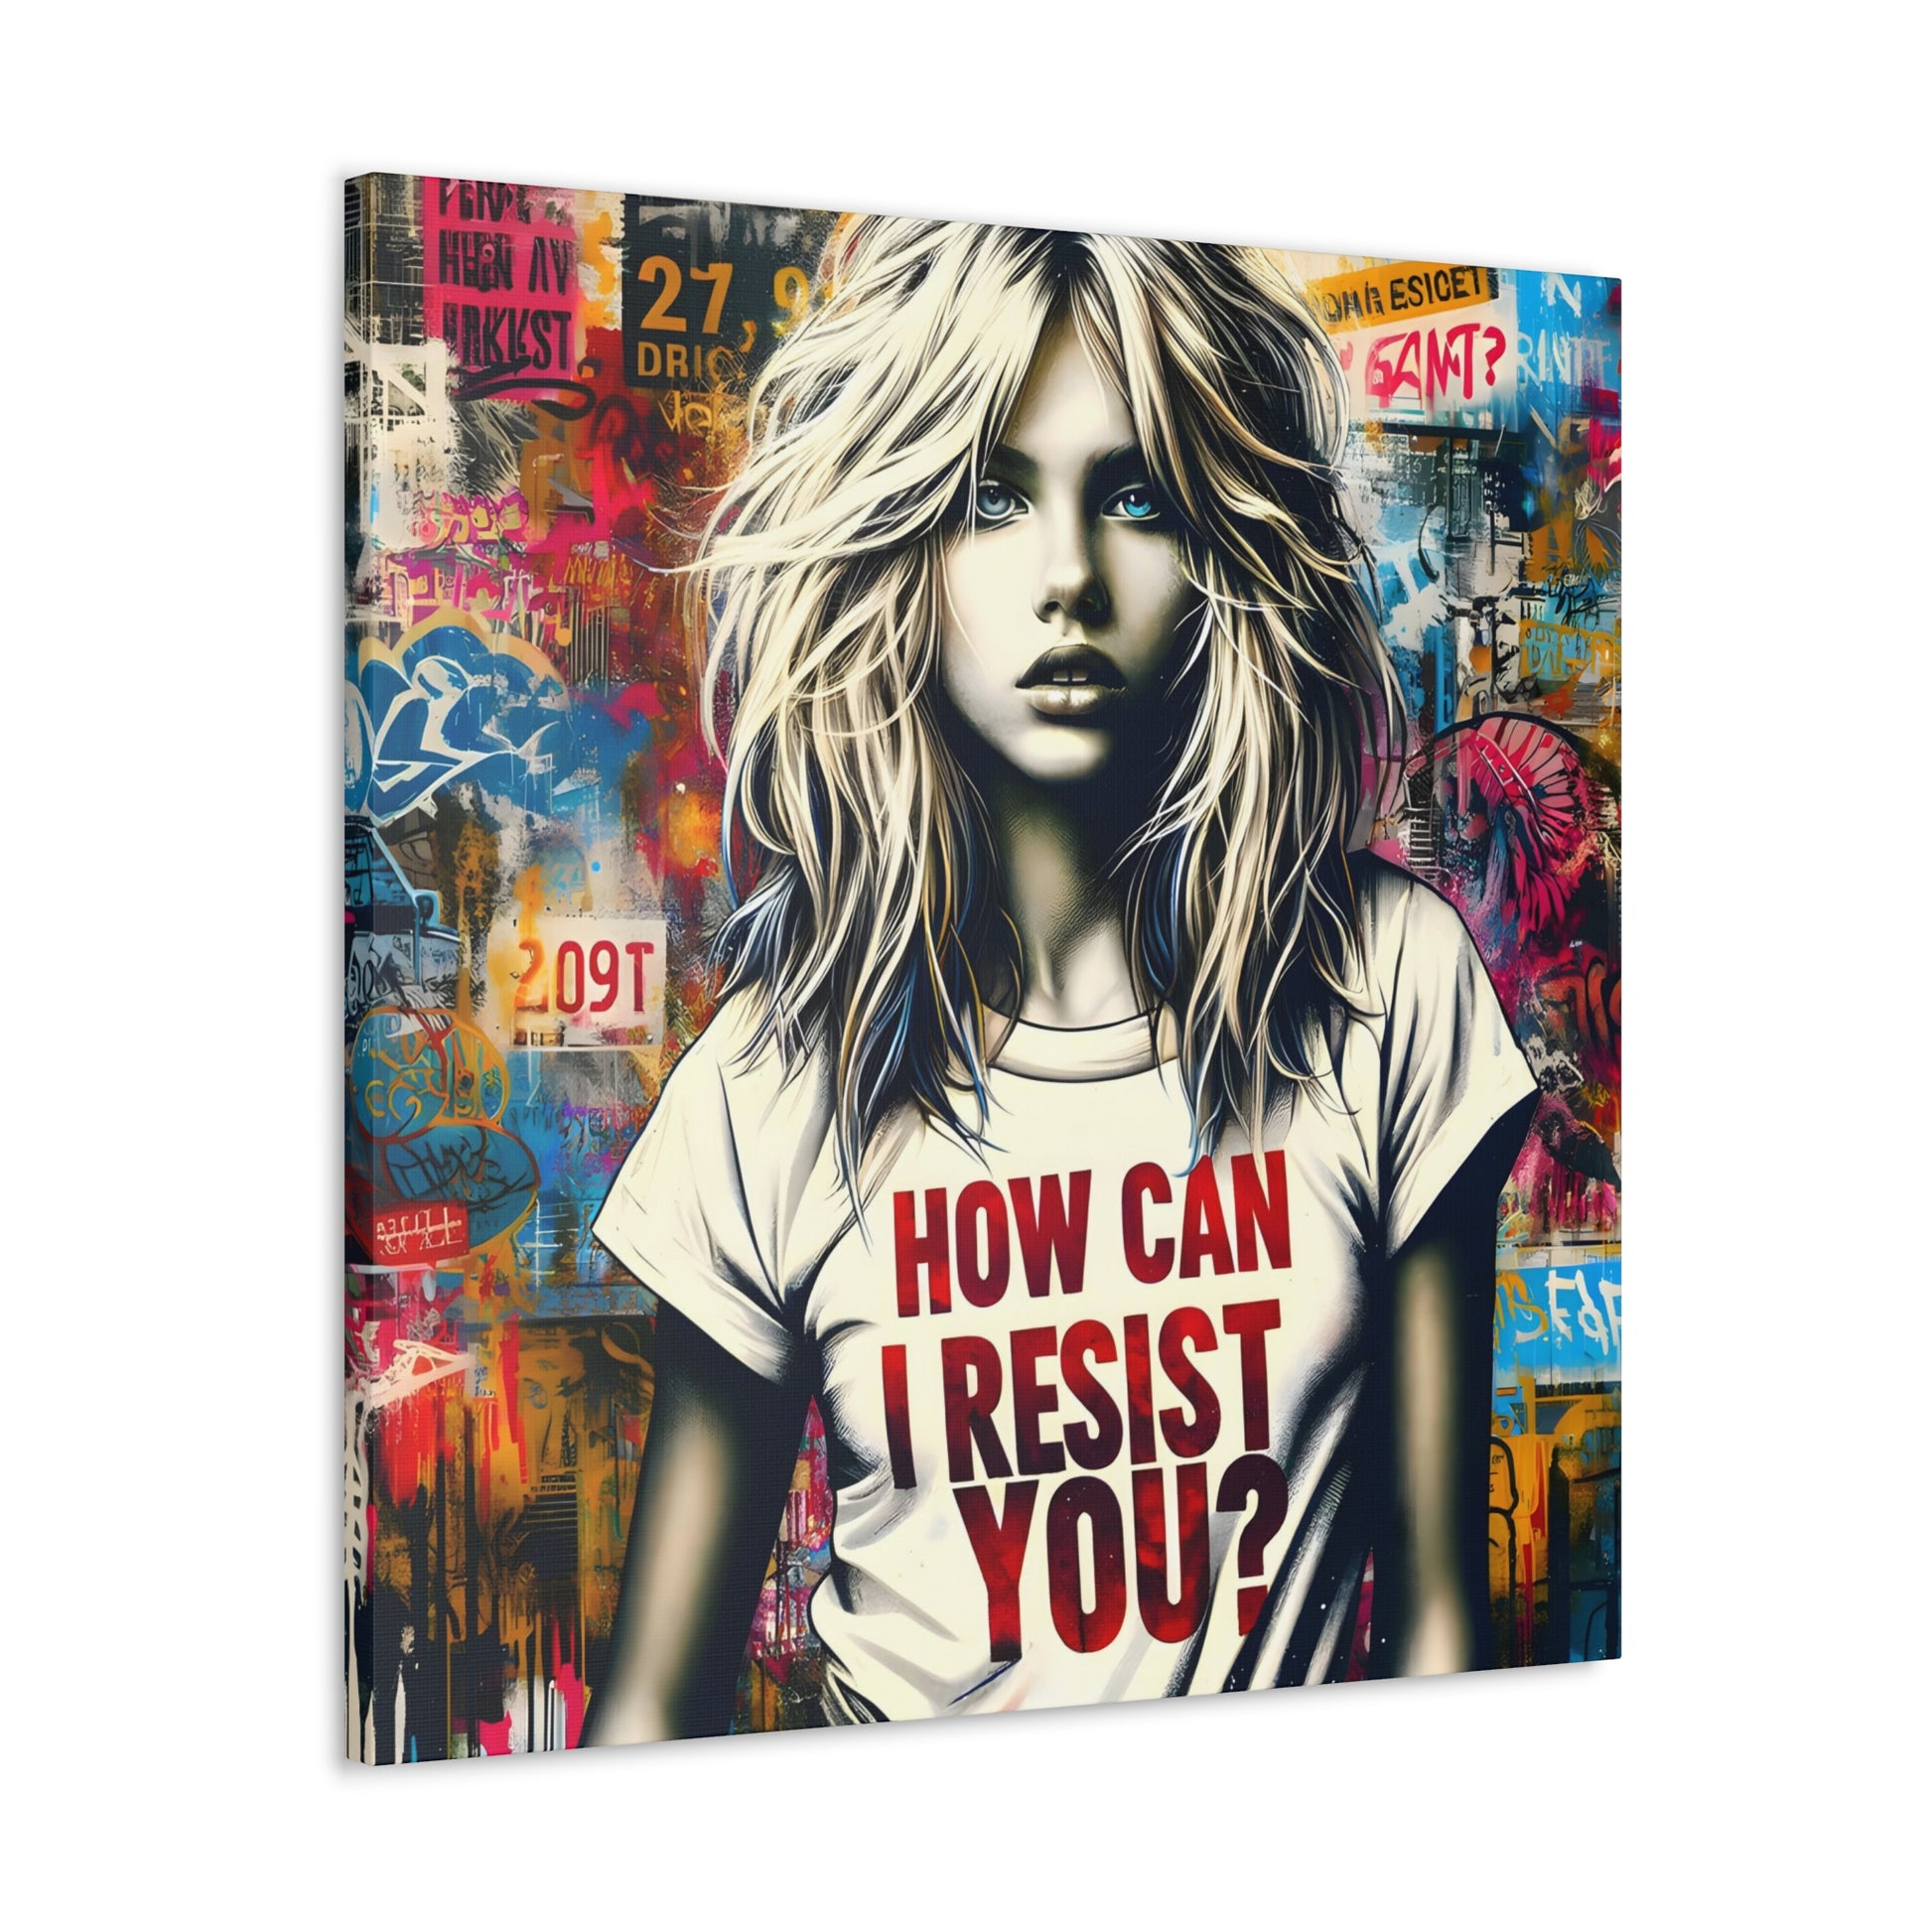 square and angled AI-generated art, 'Resist You? – An ABBA Echo,' with a modern Aphrodite in urban setting, her shirt reading 'HOW CAN I RESIST YOU?' amidst colorful graffiti, echoing ABBA's themes.